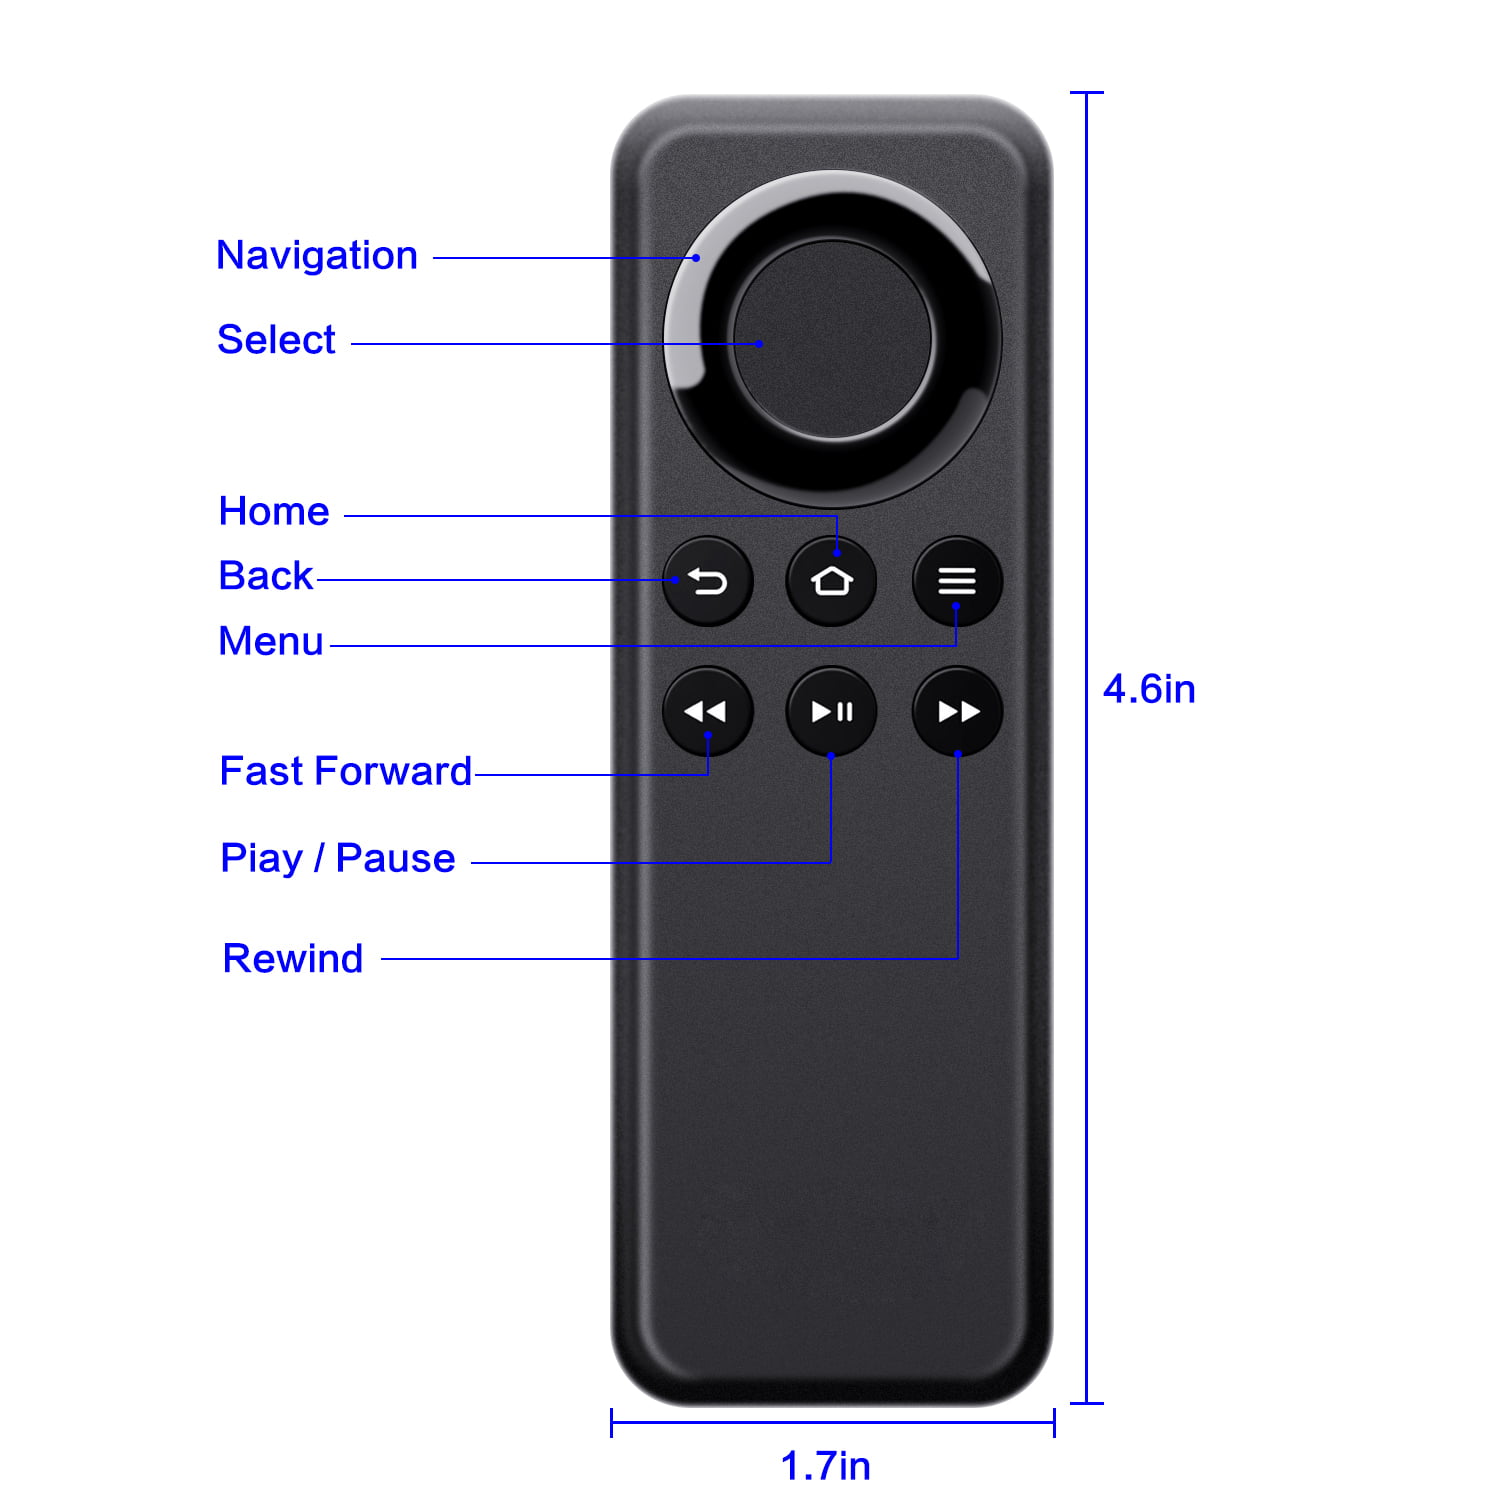 fire tv remote play ps4